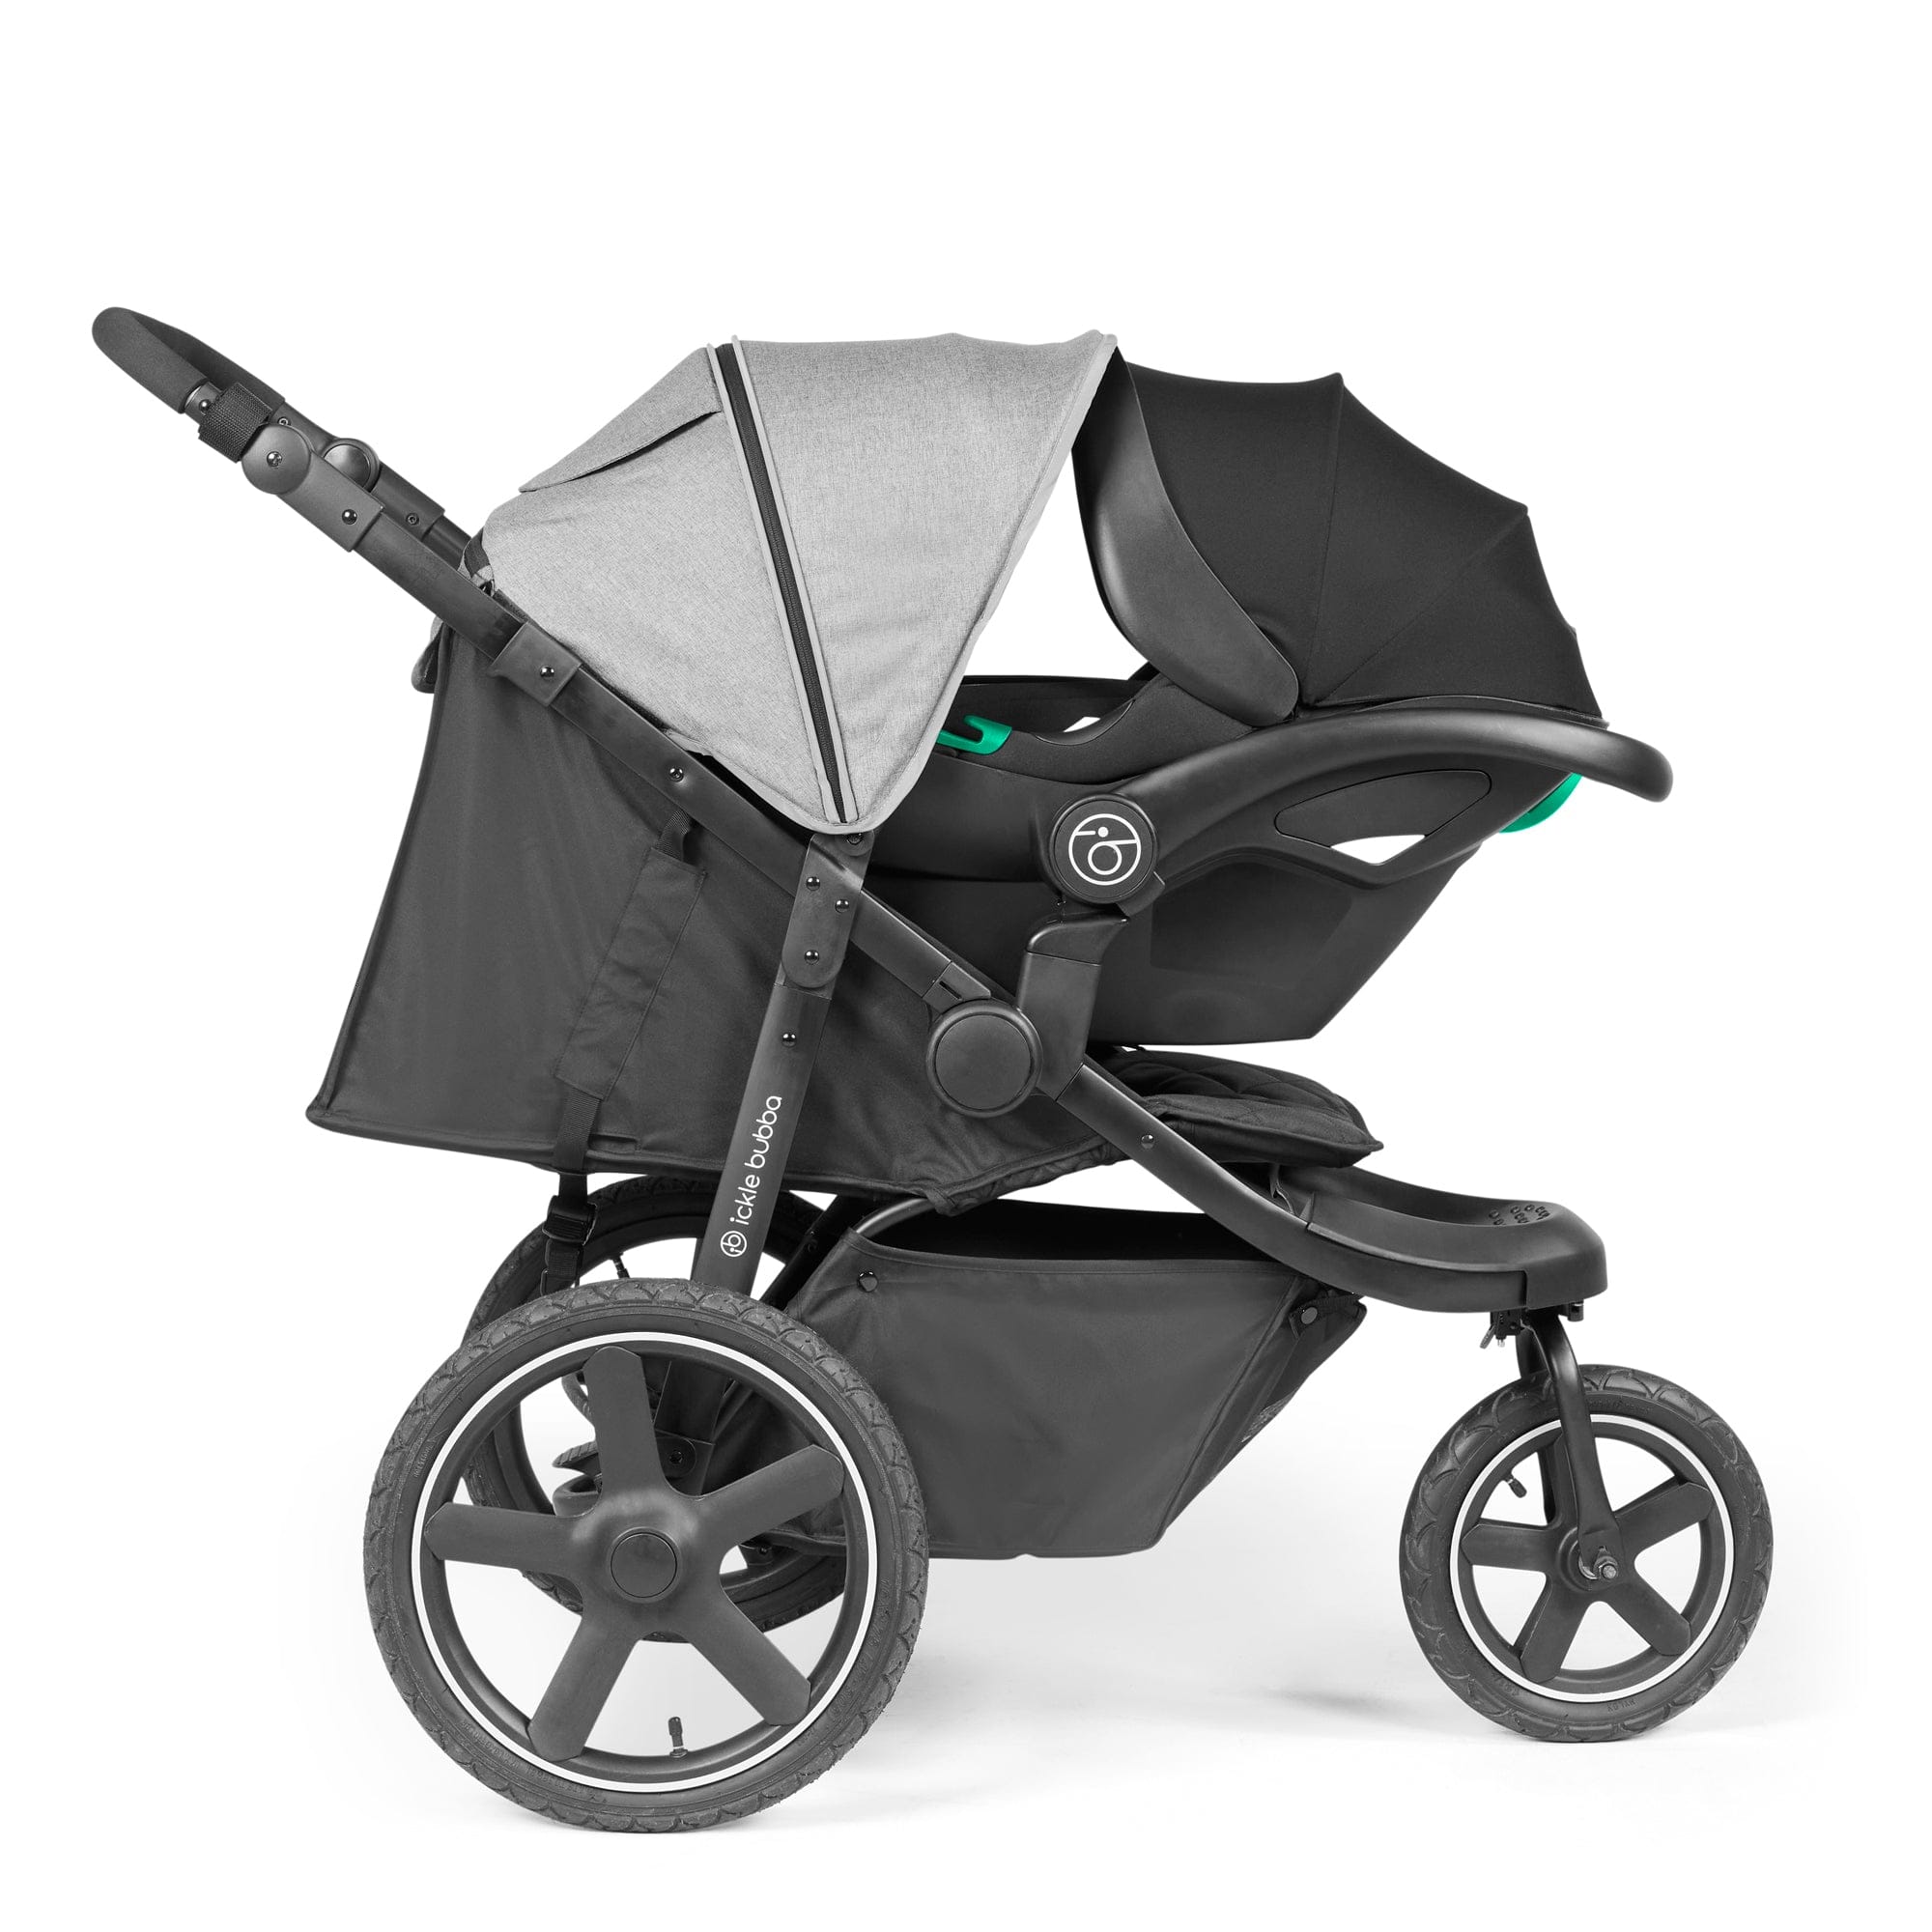 Ickle Bubba Venus Prime Jogger Stroller I-Size Travel System in Black/Space Grey with Base 3 Wheelers 13-004-600-014 5056515025934